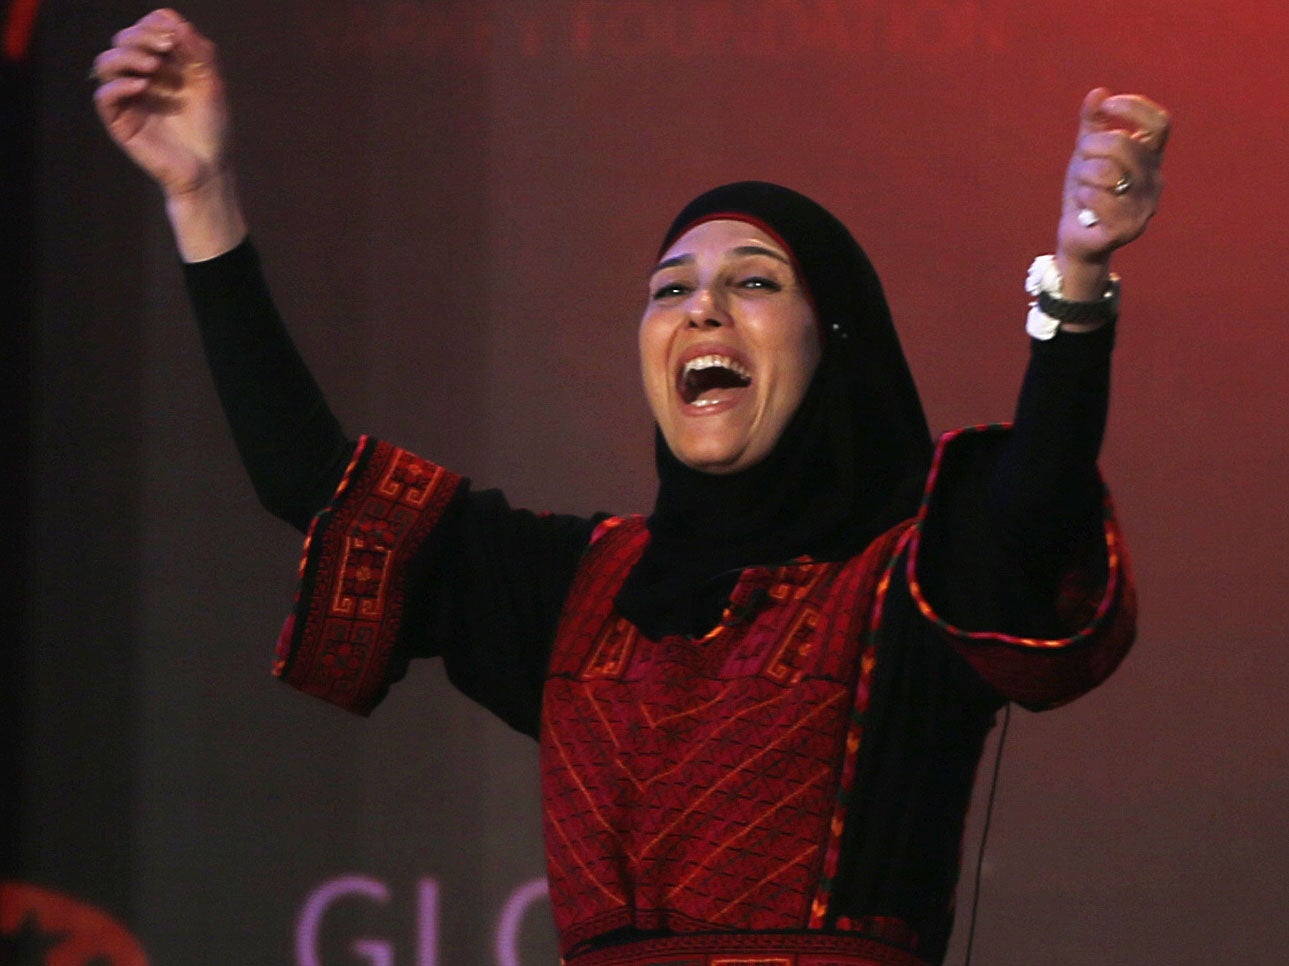 Palestinian primary school teacher Hanan al-Hroub reacts after she won the second annual Global Teacher Prize